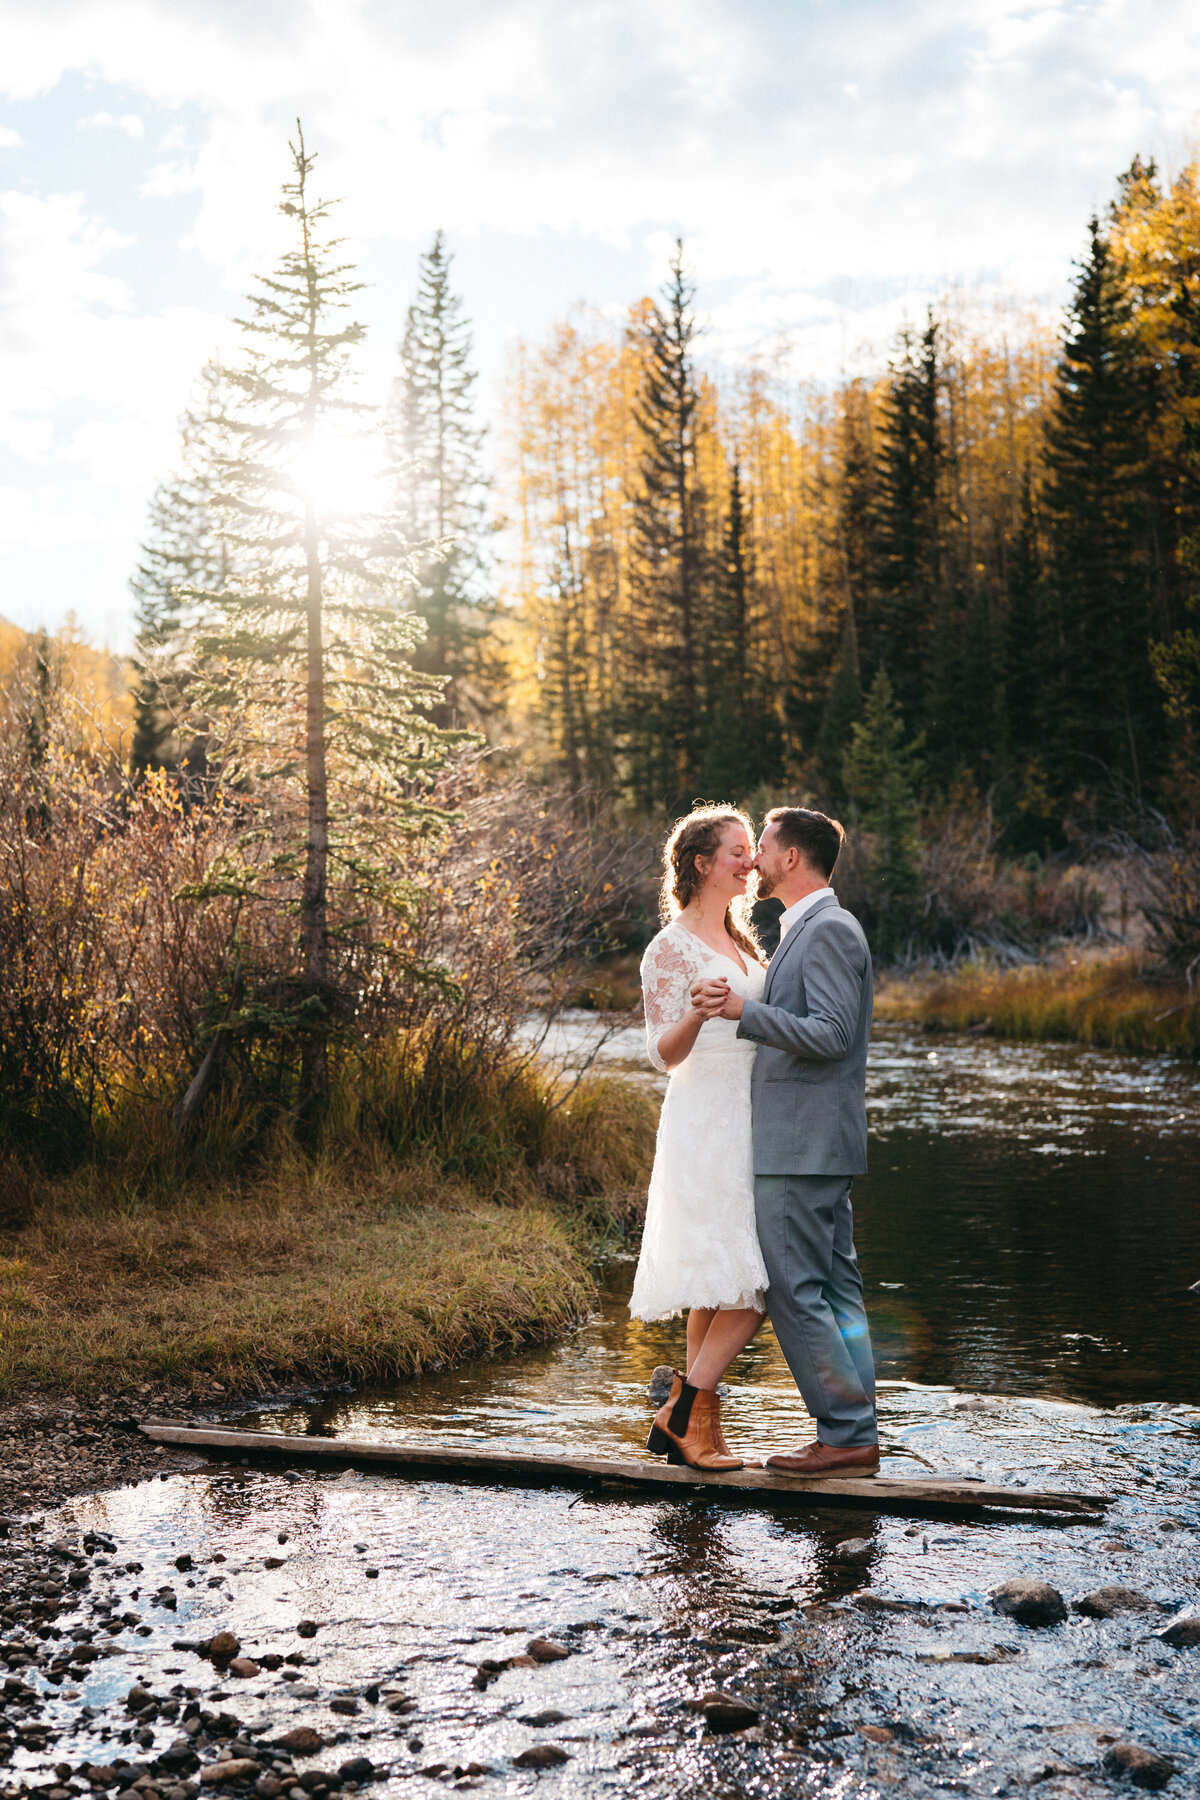 Fall Elopement in Colorado Ghost town